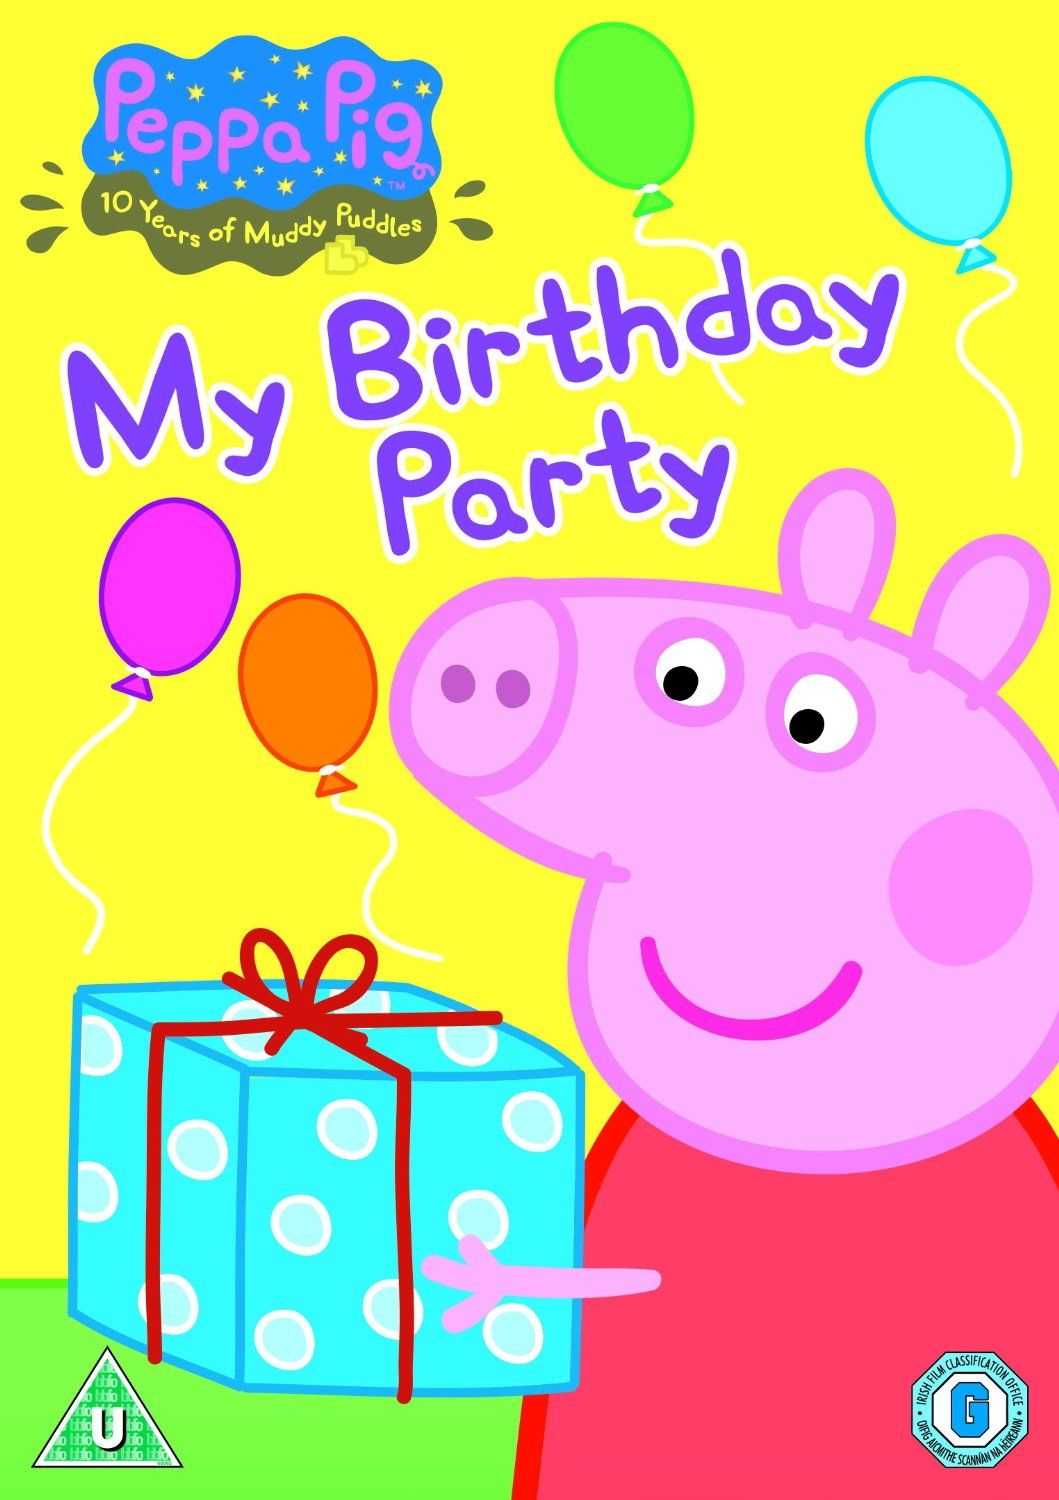 Peppa Pig: My Birthday Party and Other Stories Volume 5 DVD ...